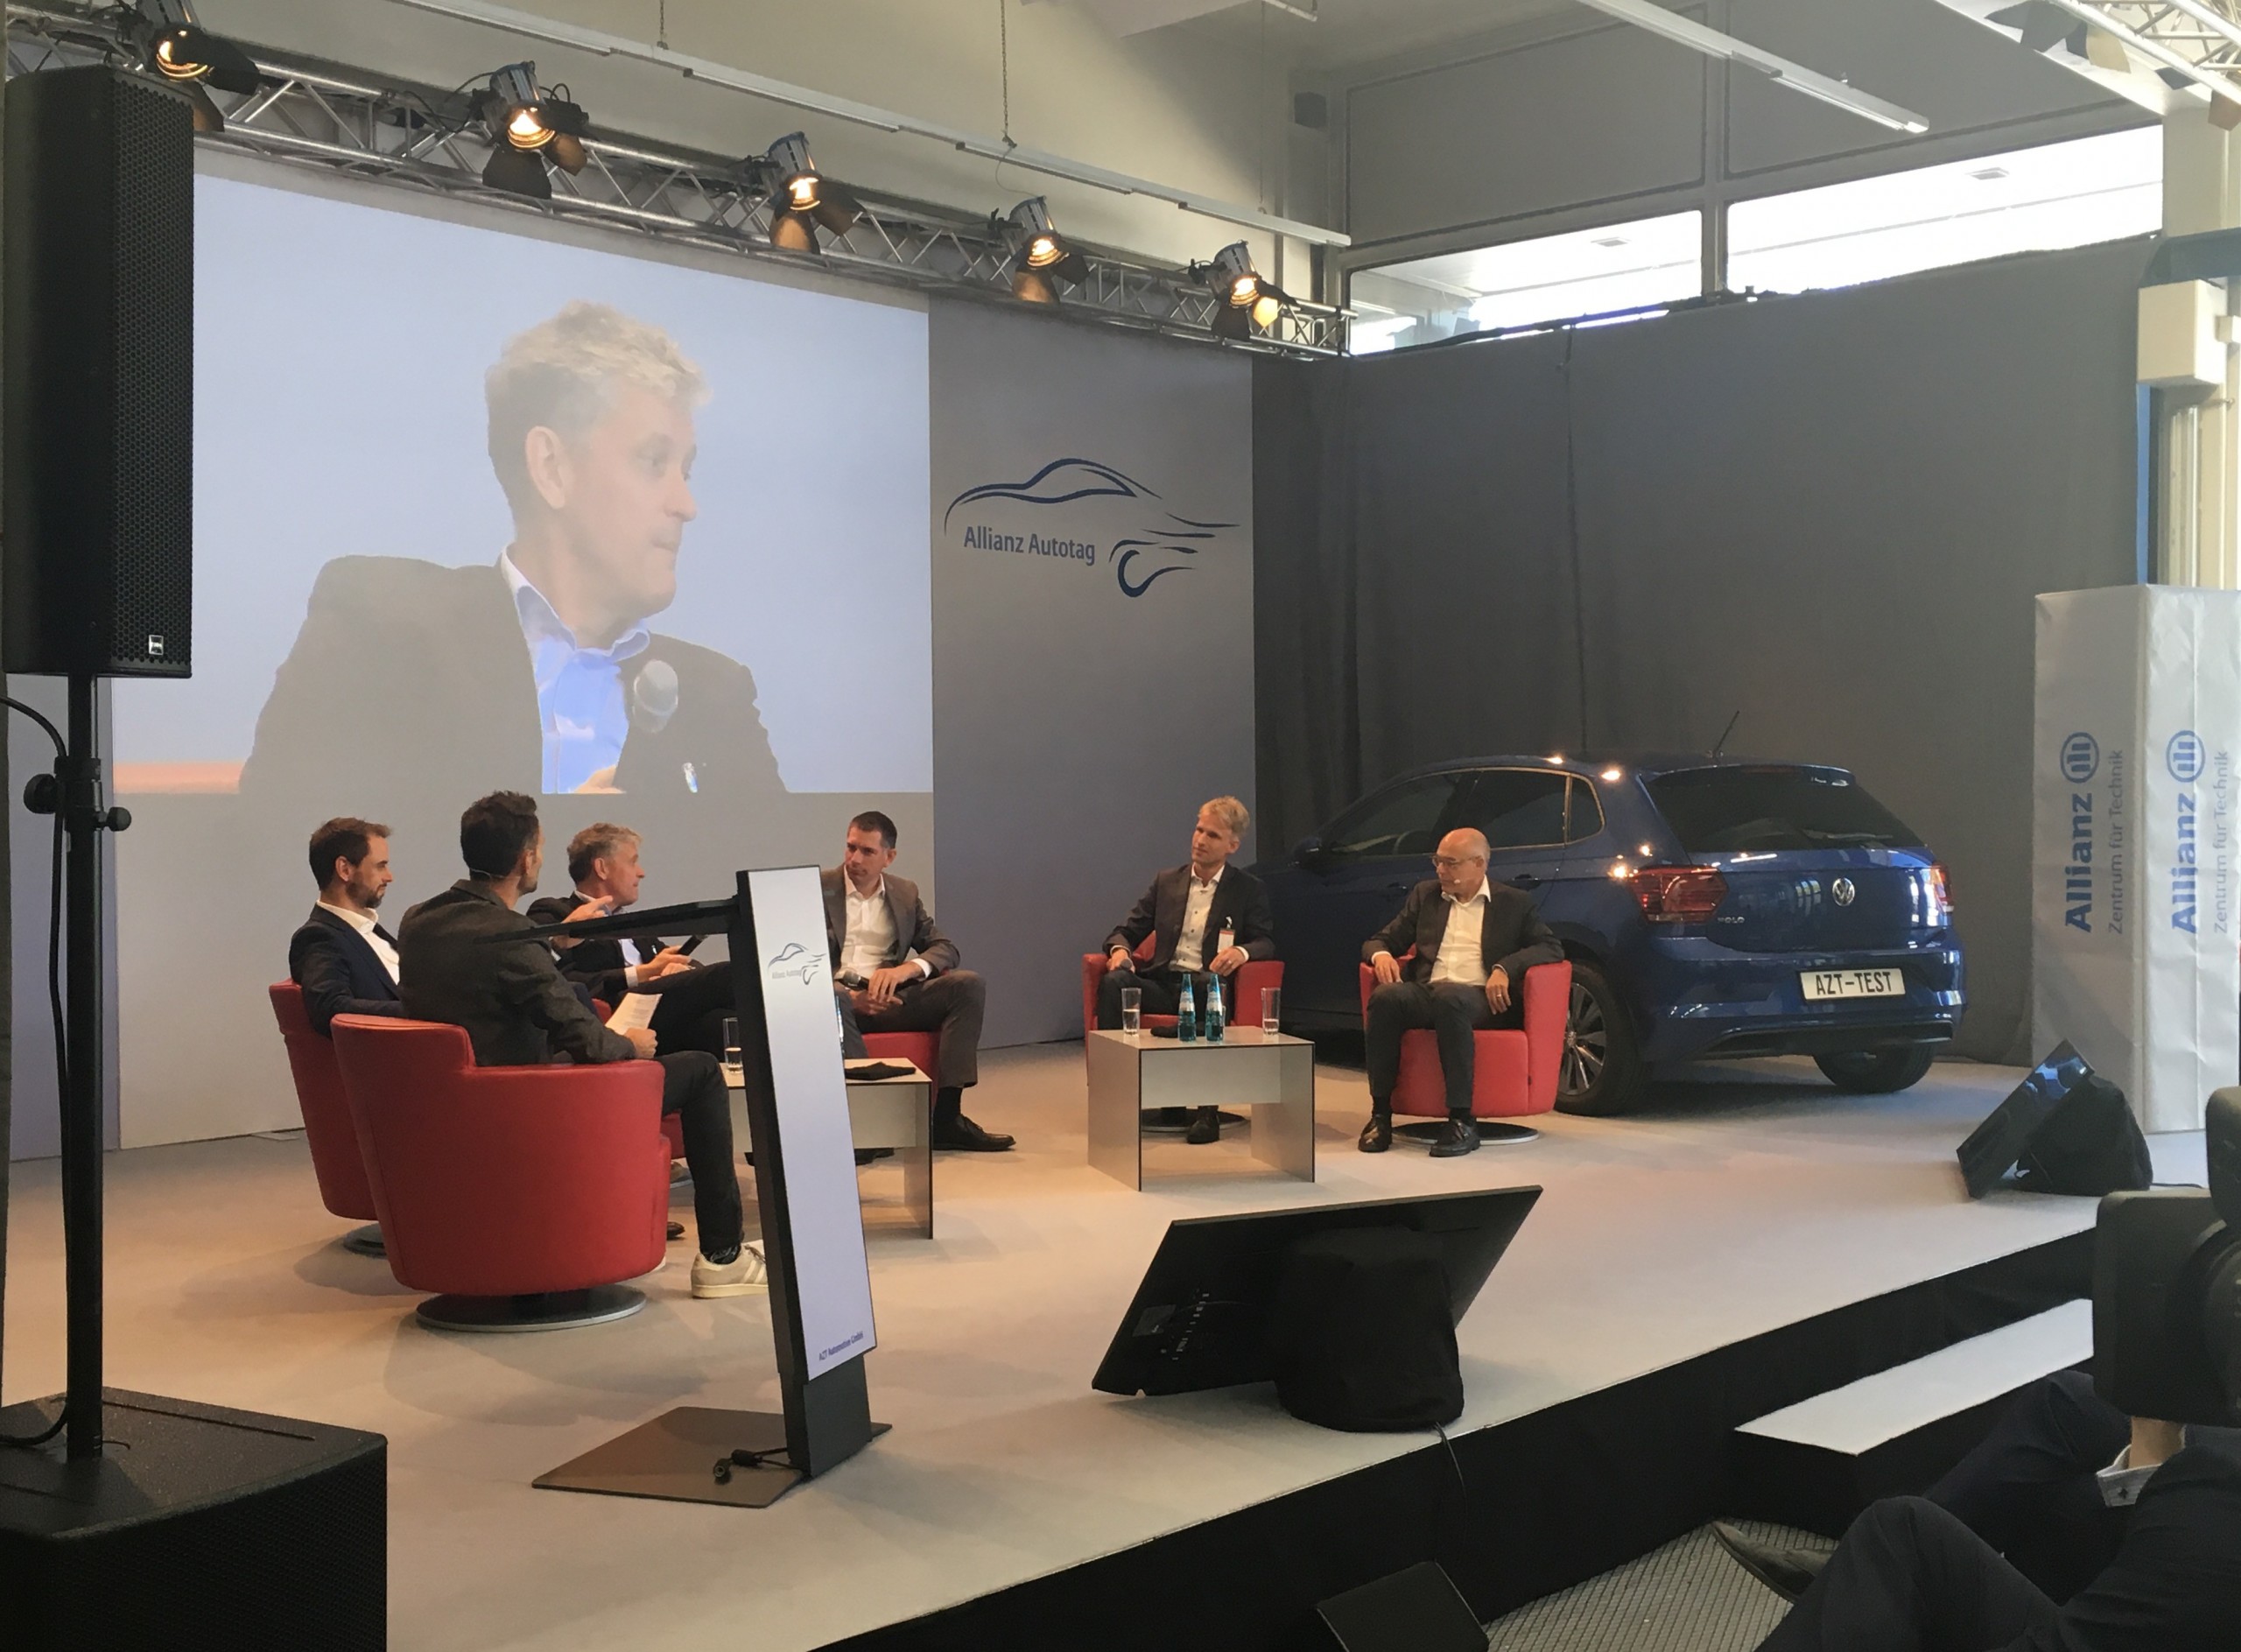 Panel discussion on the future of parking with representatives from the automotive, mobility and insurance industries